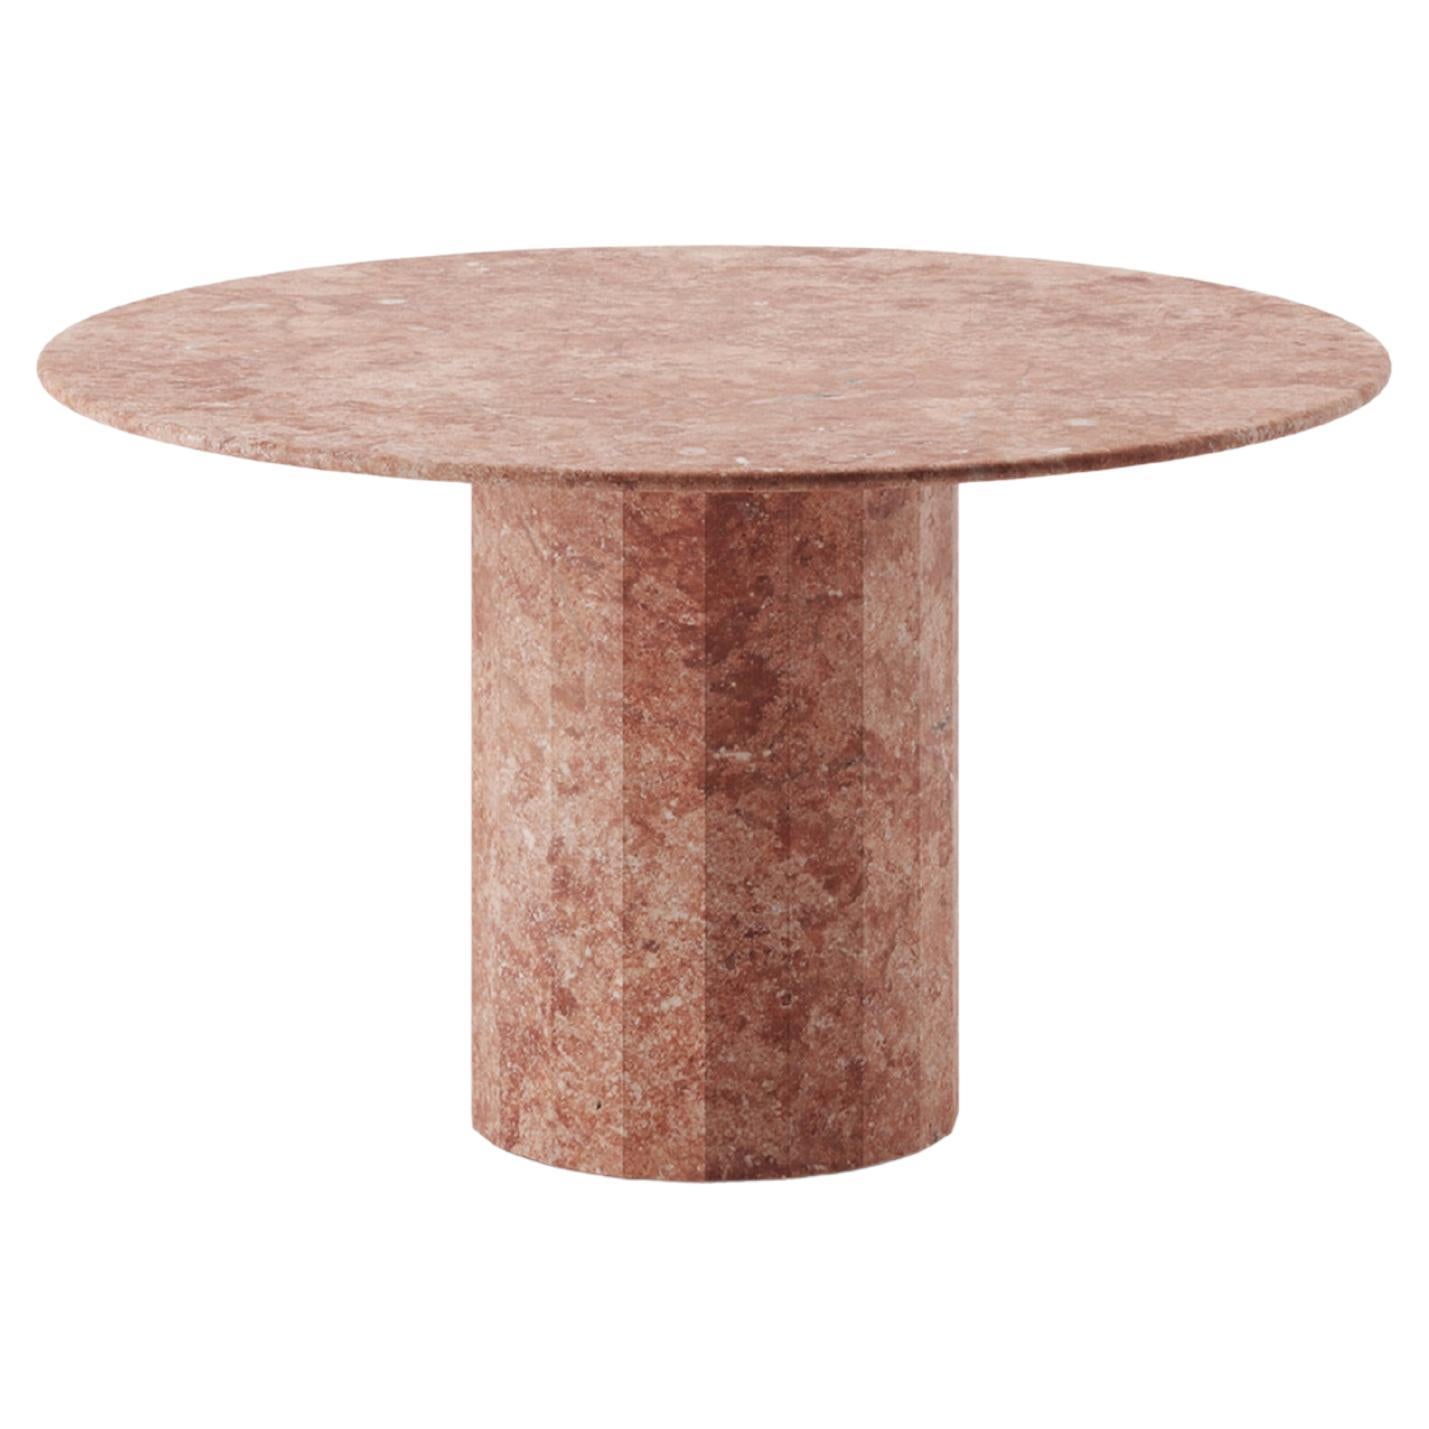 Palladian 130cm/51.2" Round Table in Red/Pink Travertine  For Sale